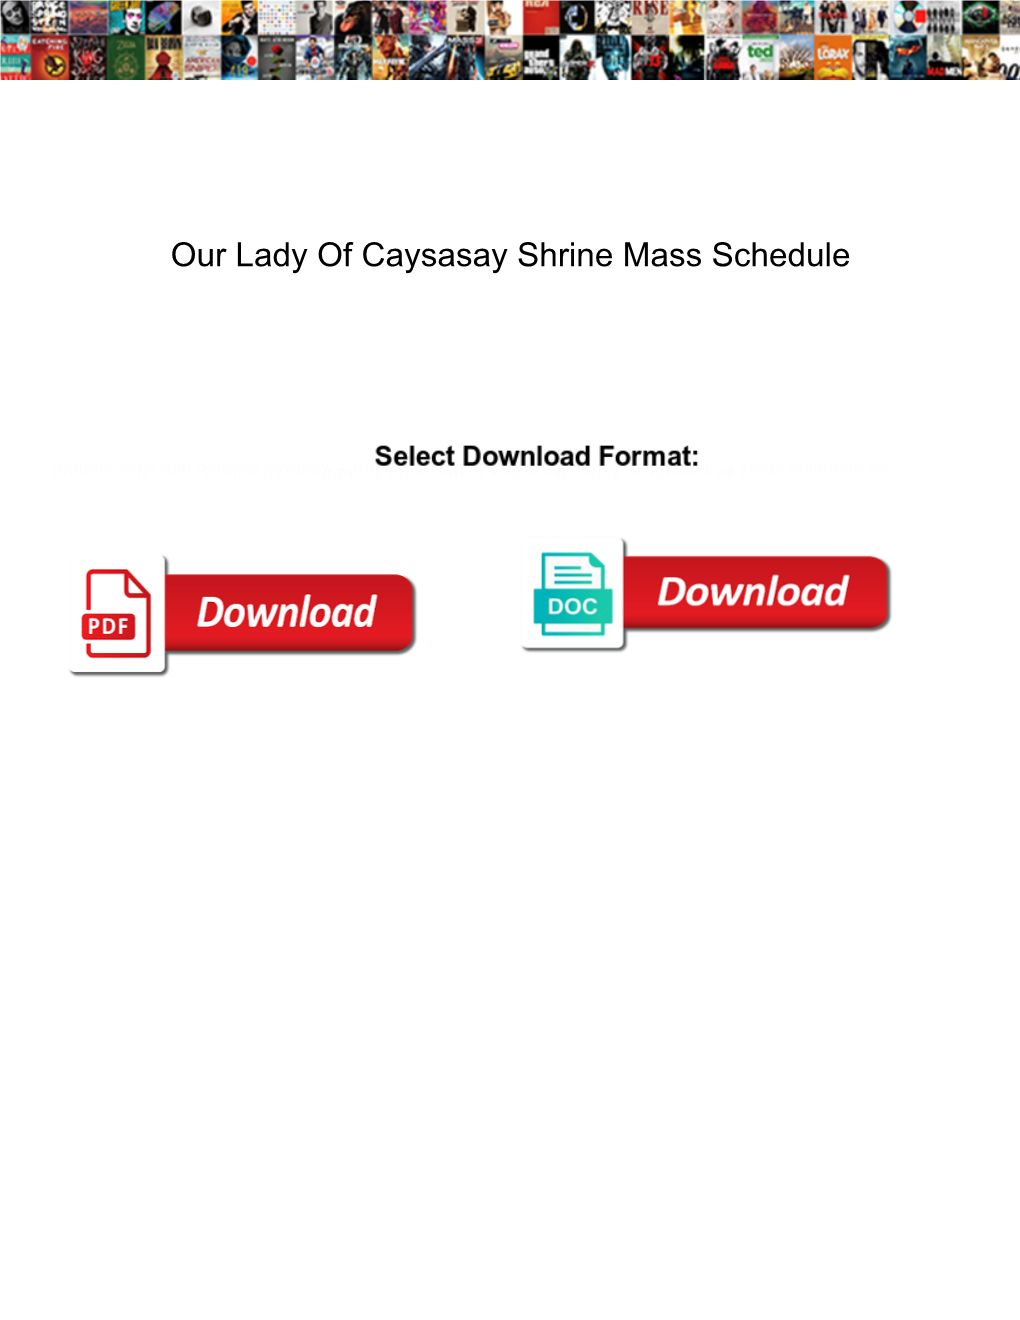 Our Lady of Caysasay Shrine Mass Schedule